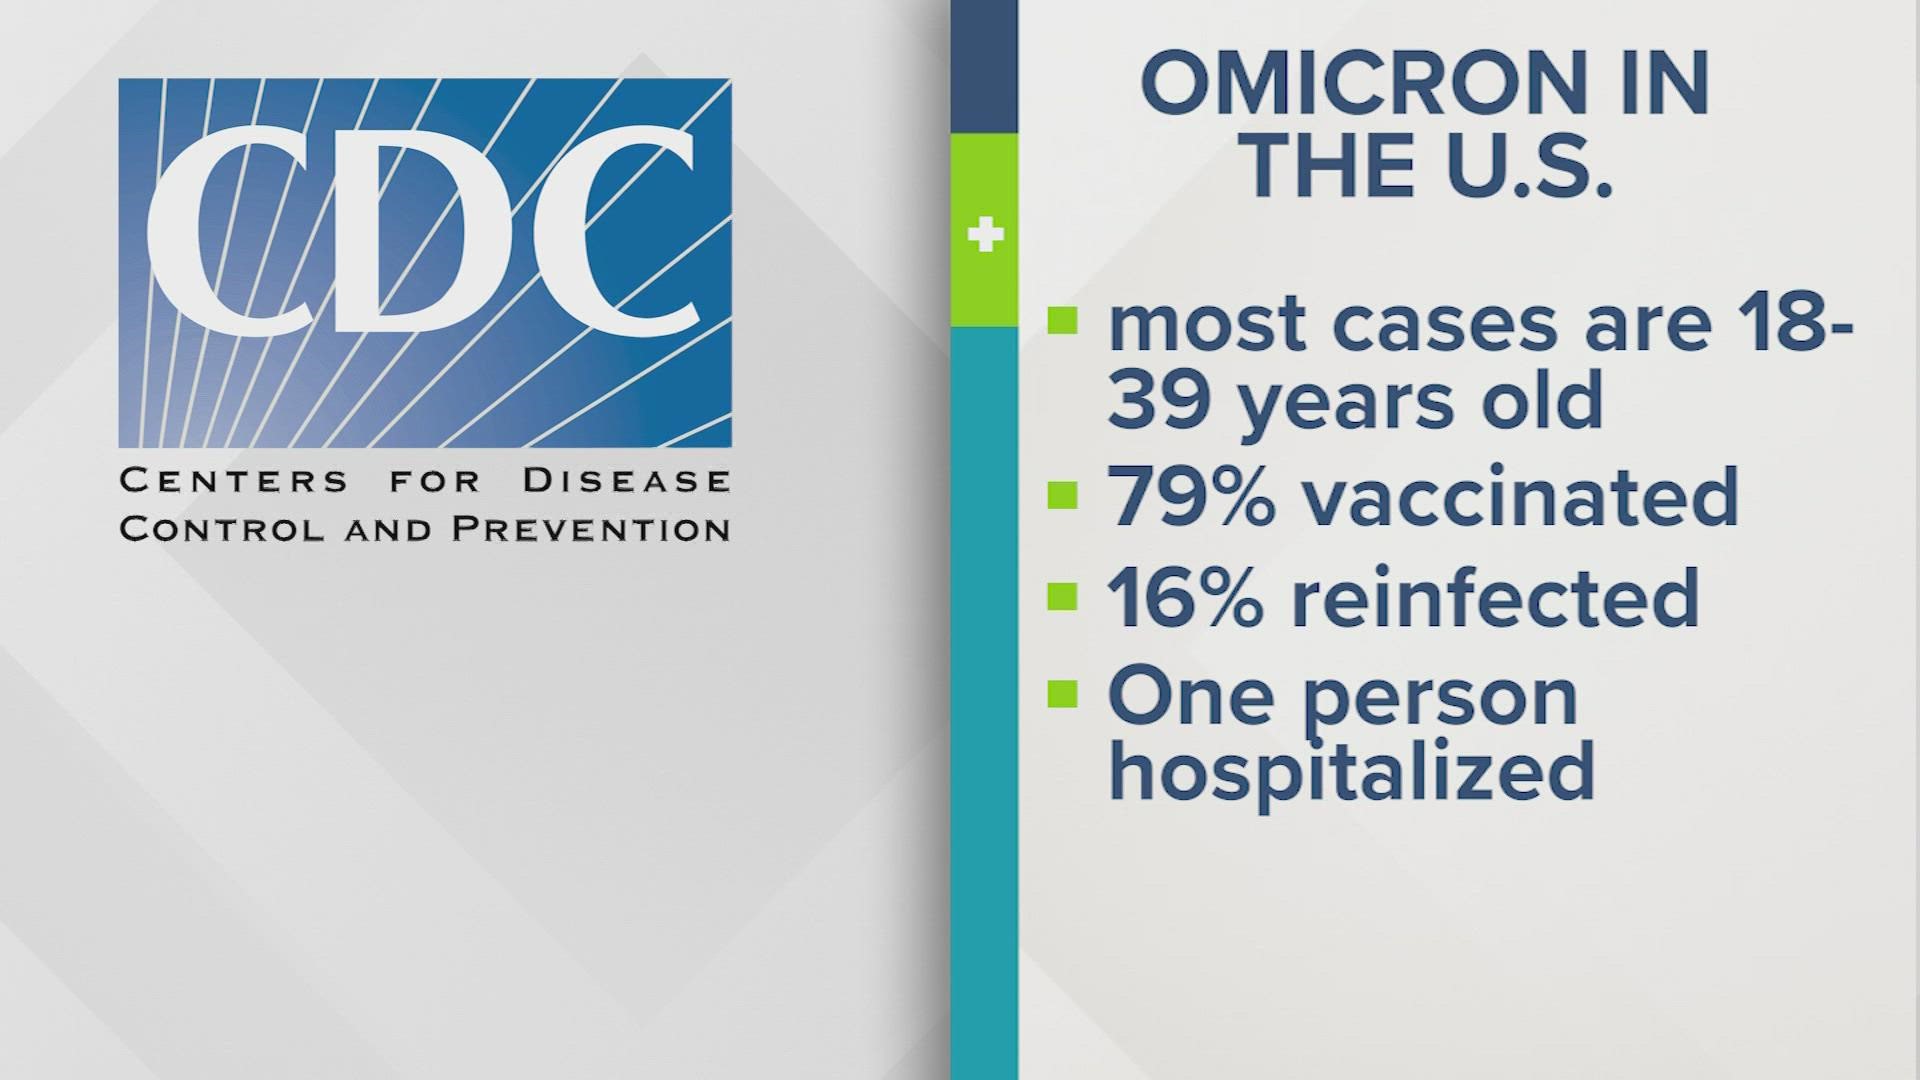 In the first week of December, most cases of omicron were young, vaccinated people with mild cases. More than a dozen people had also received a booster dose.